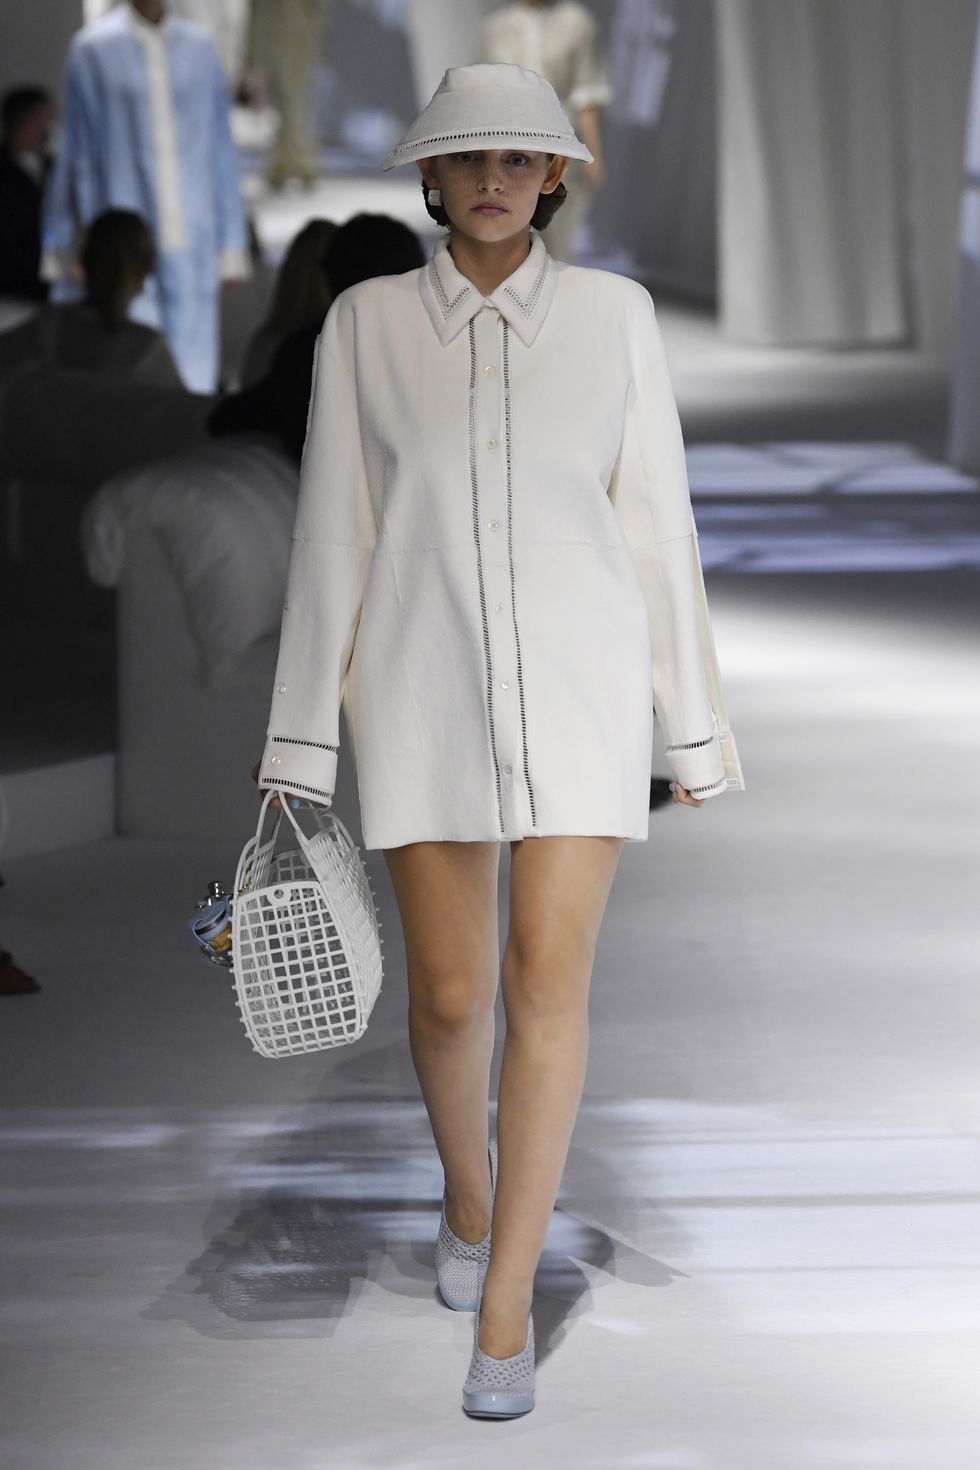 Fendi Spring 2021 Collection Images - Fendi's Runway Show Reflects